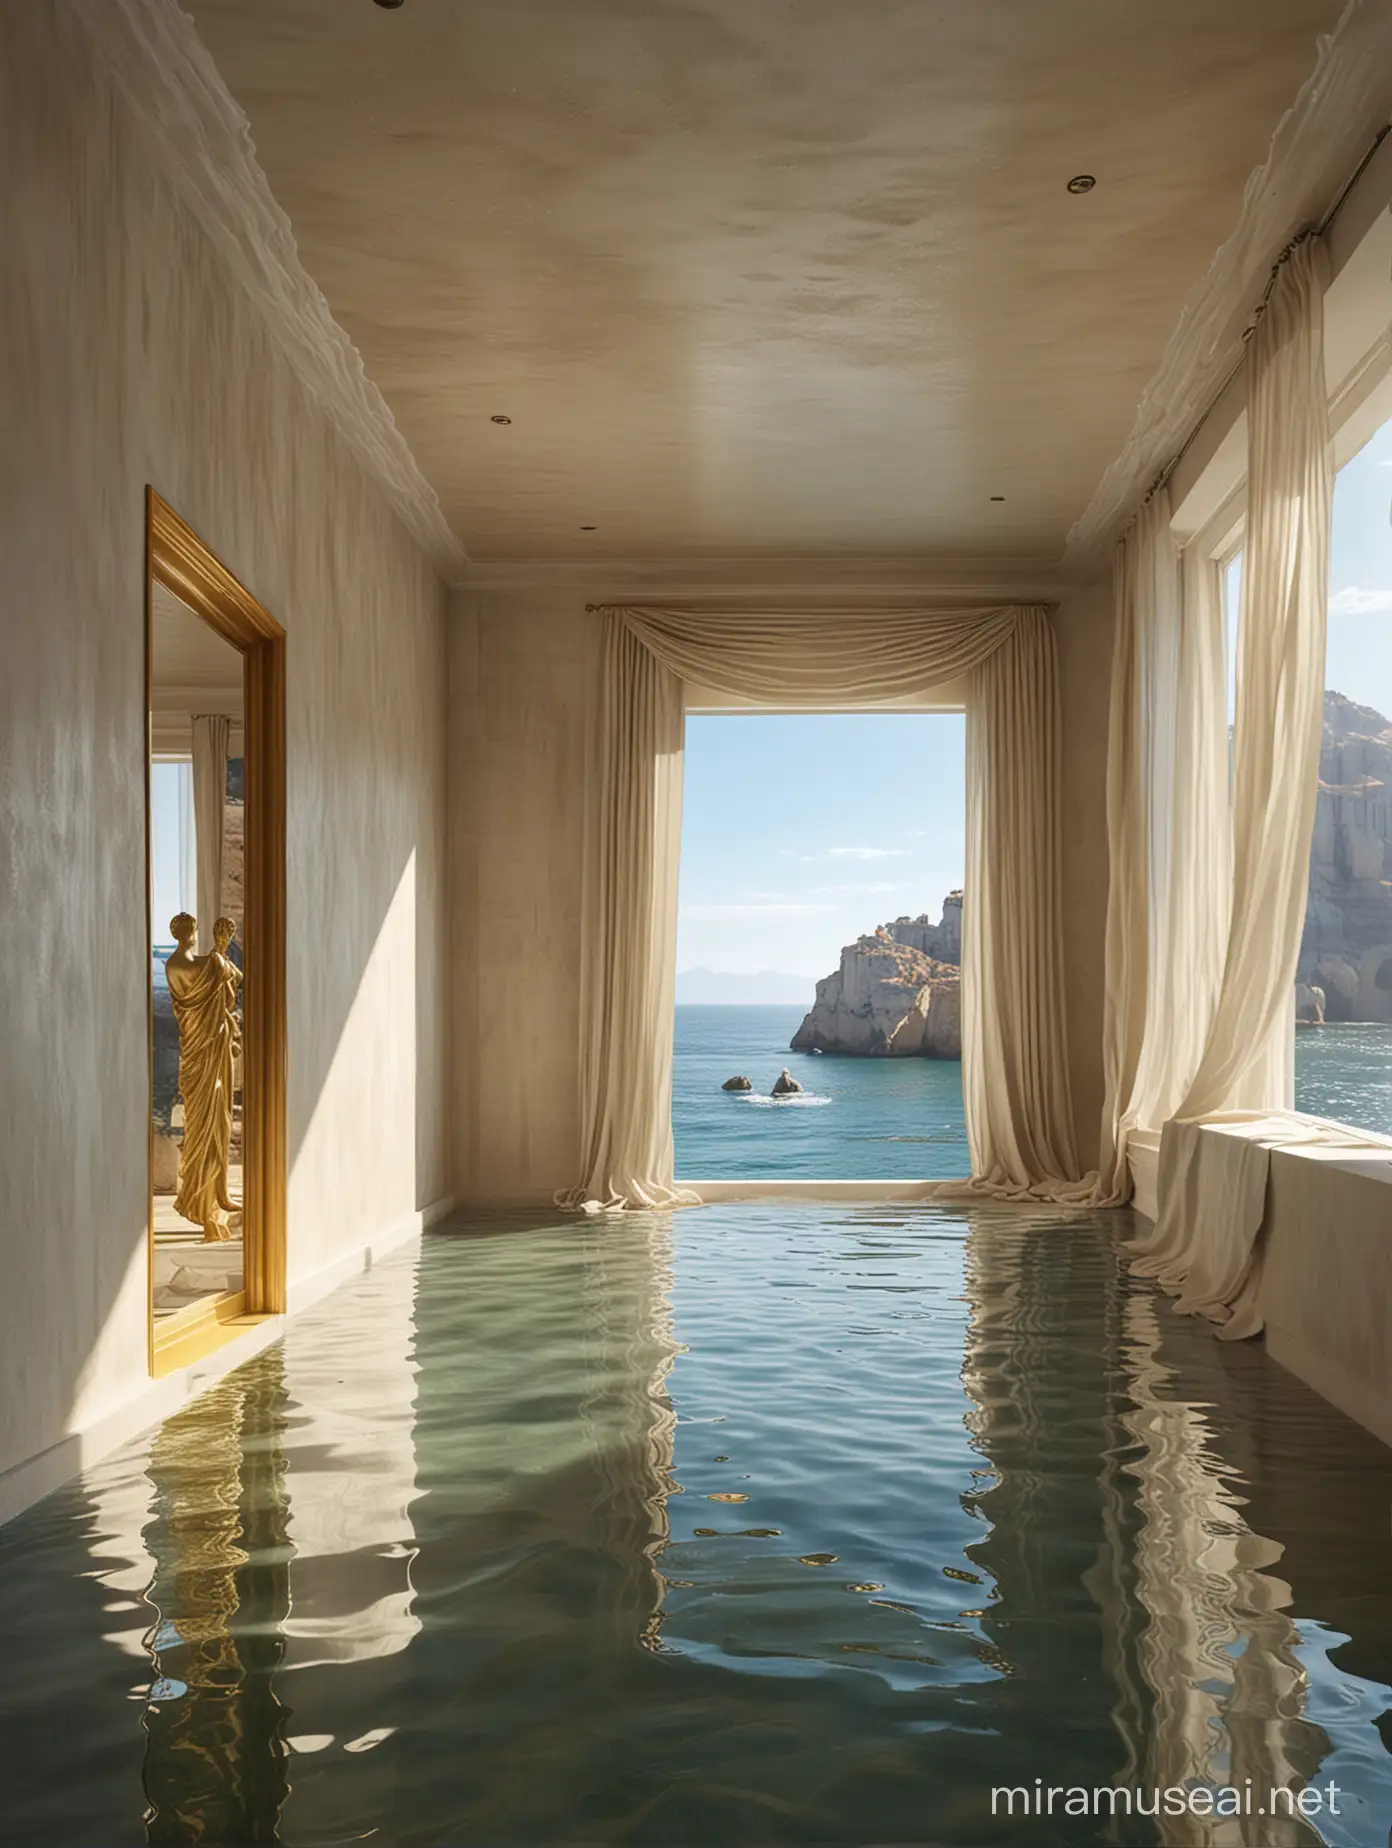 Tranquil Golden Sculpture on Water Floor with Sunny Cliffs View